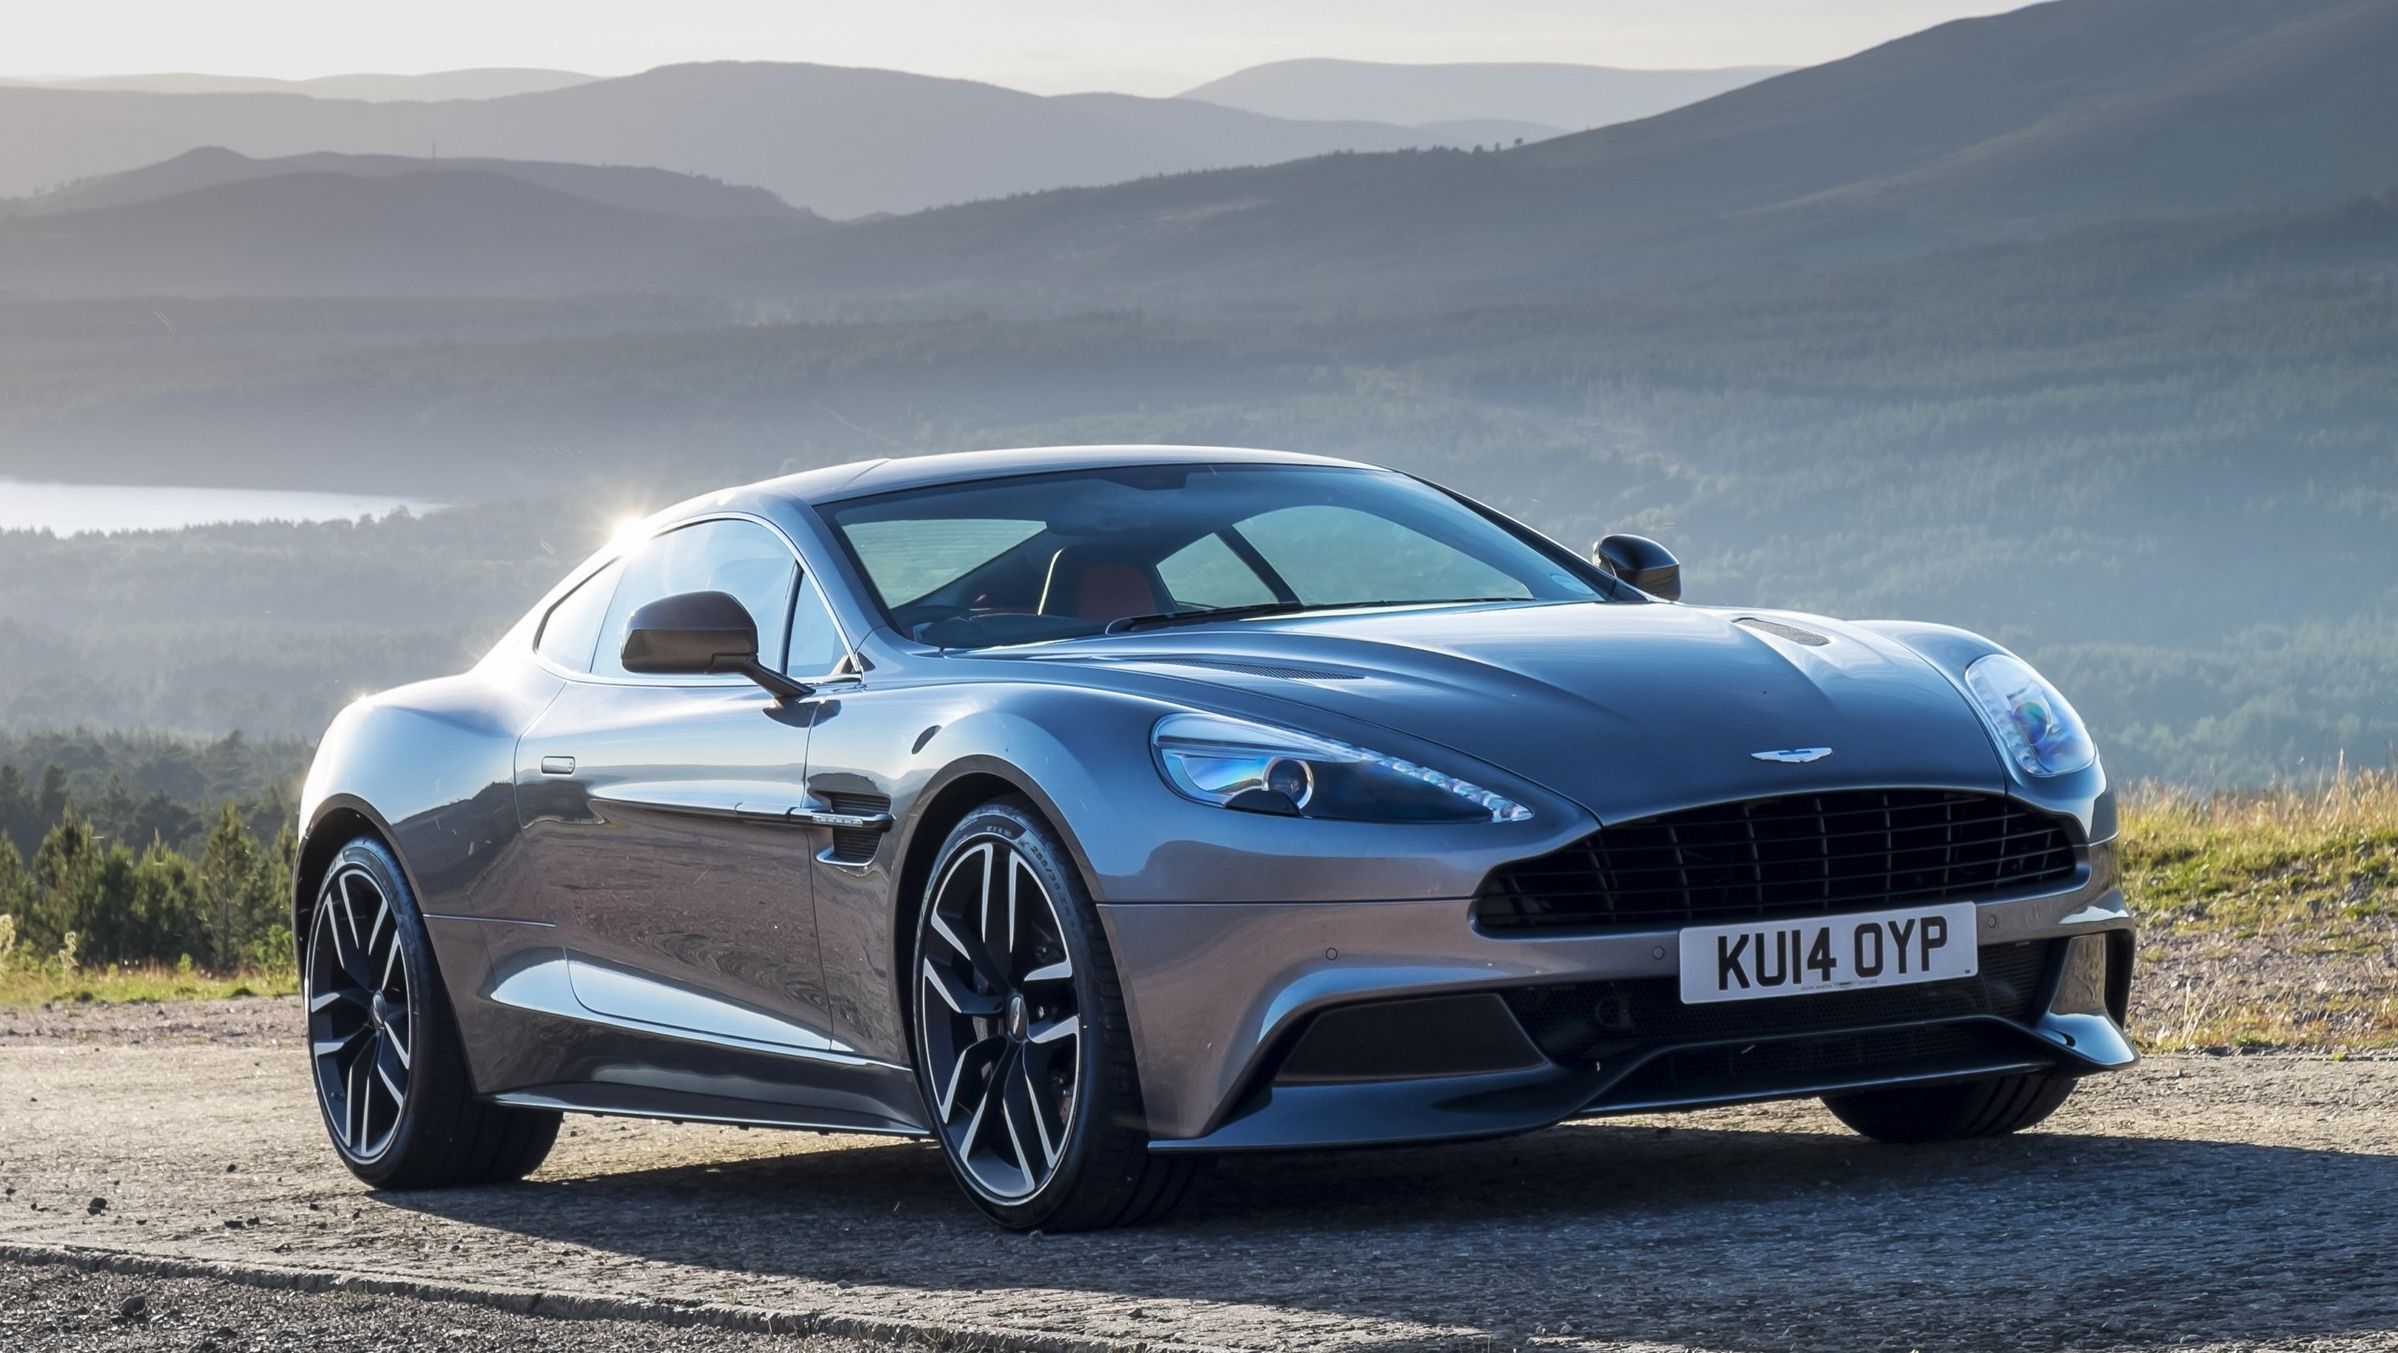 2016 Next-Generation Aston Martin Vanquish Could Receive New V-12 Engine With 700 Horsepower